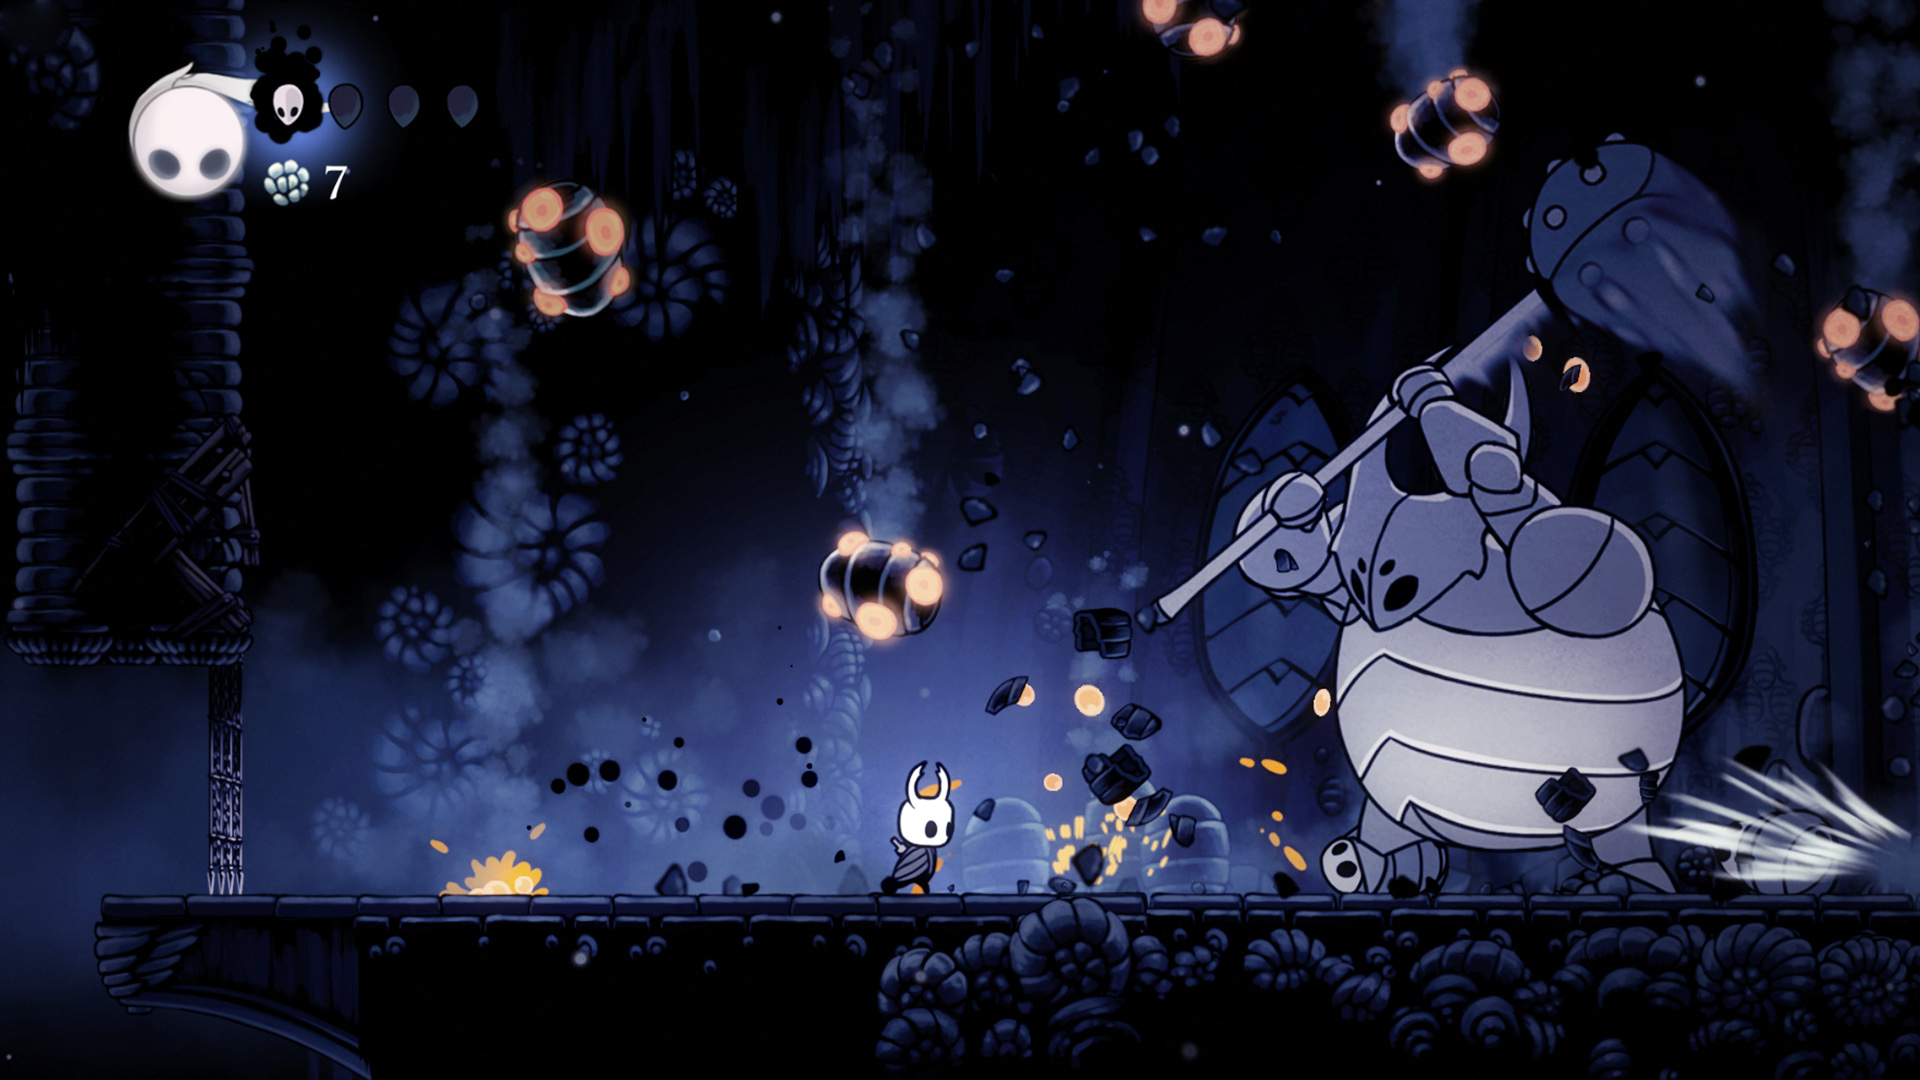 "Hollow Knight" indie video game